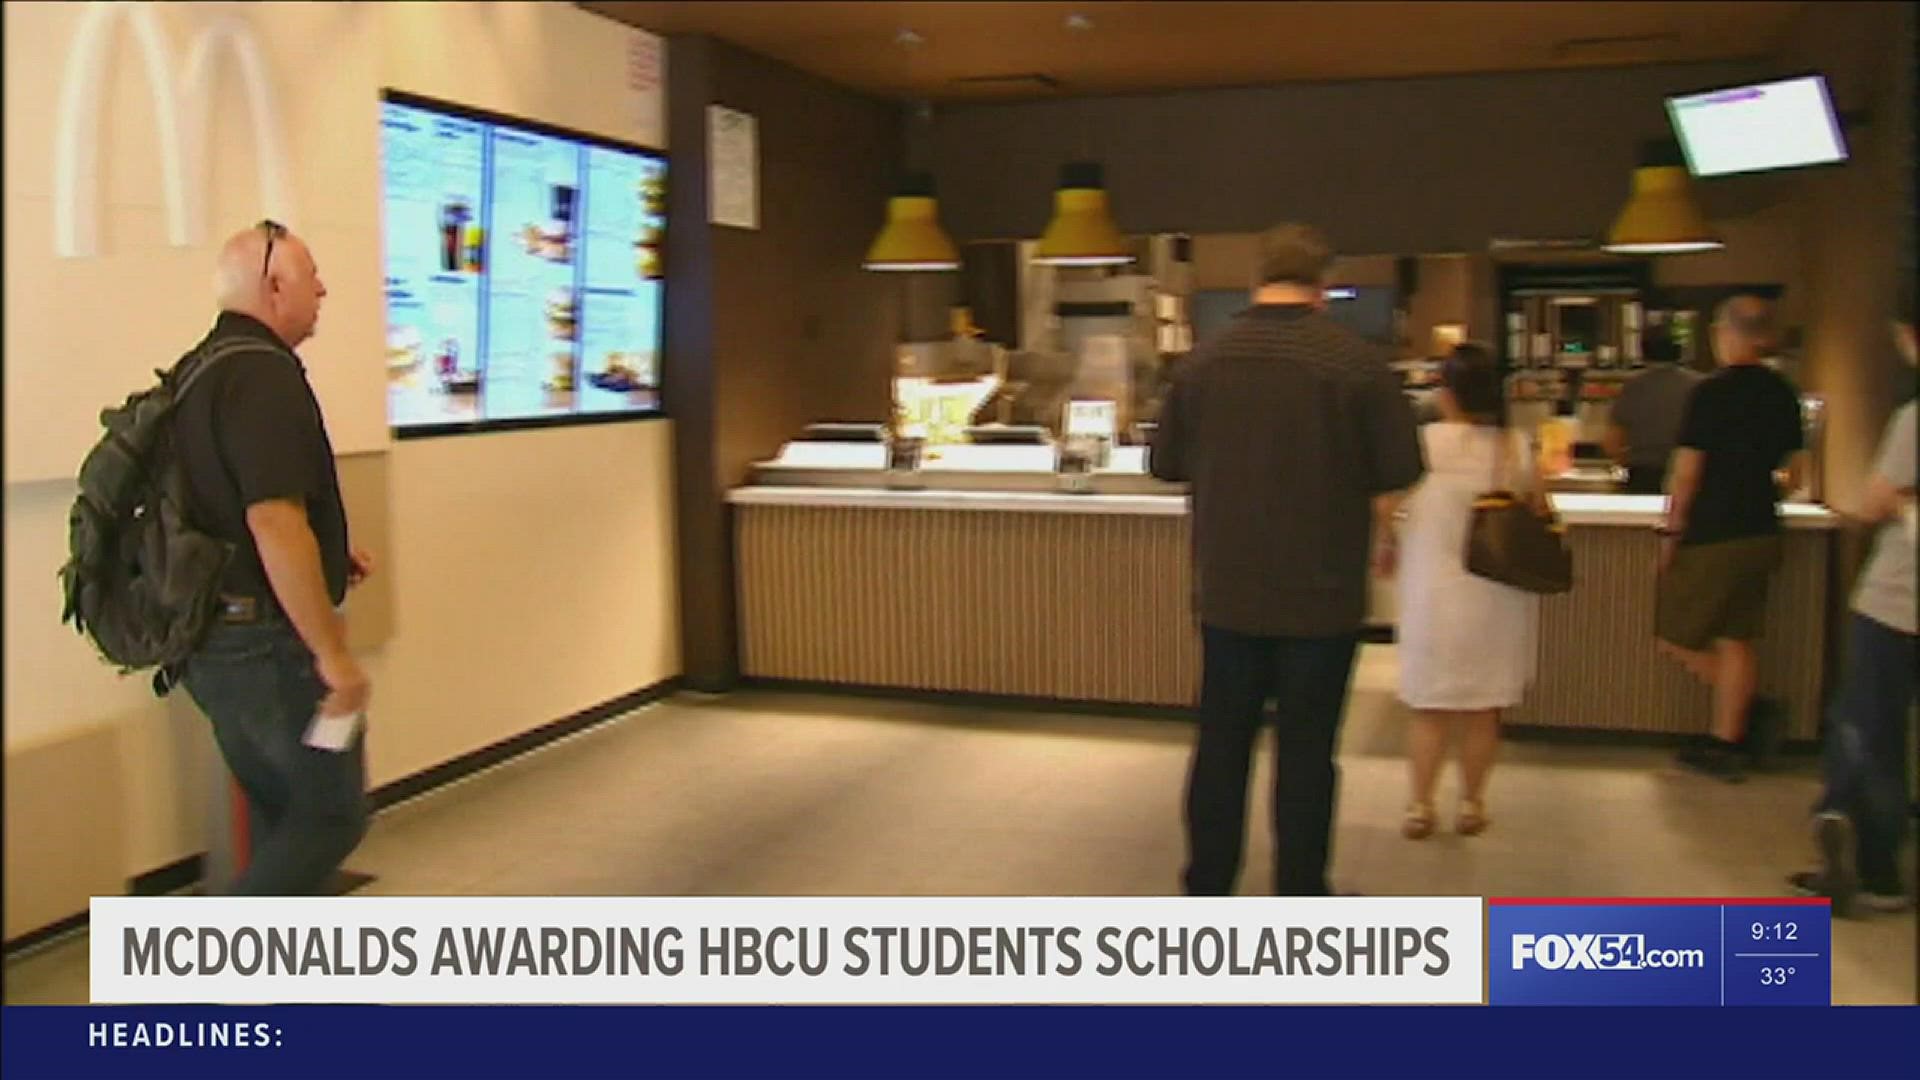 Tennessee Valley McDonald's owner-operators are offering 10 $1,000 HBCU scholarships